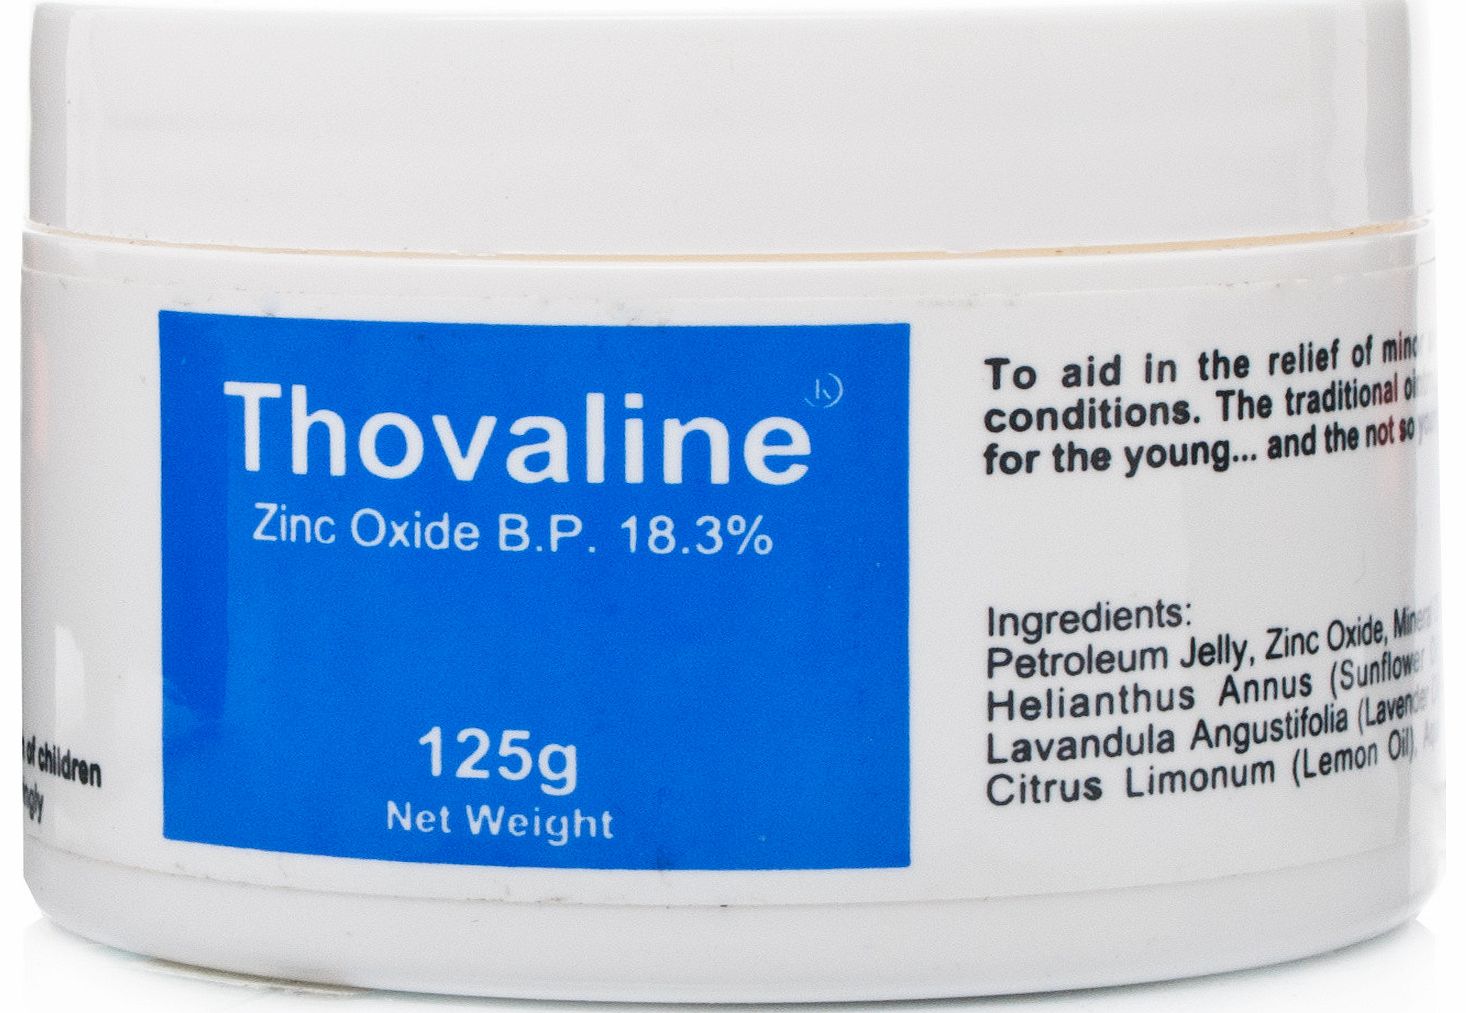 Unbranded Thovaline Ointment 125g